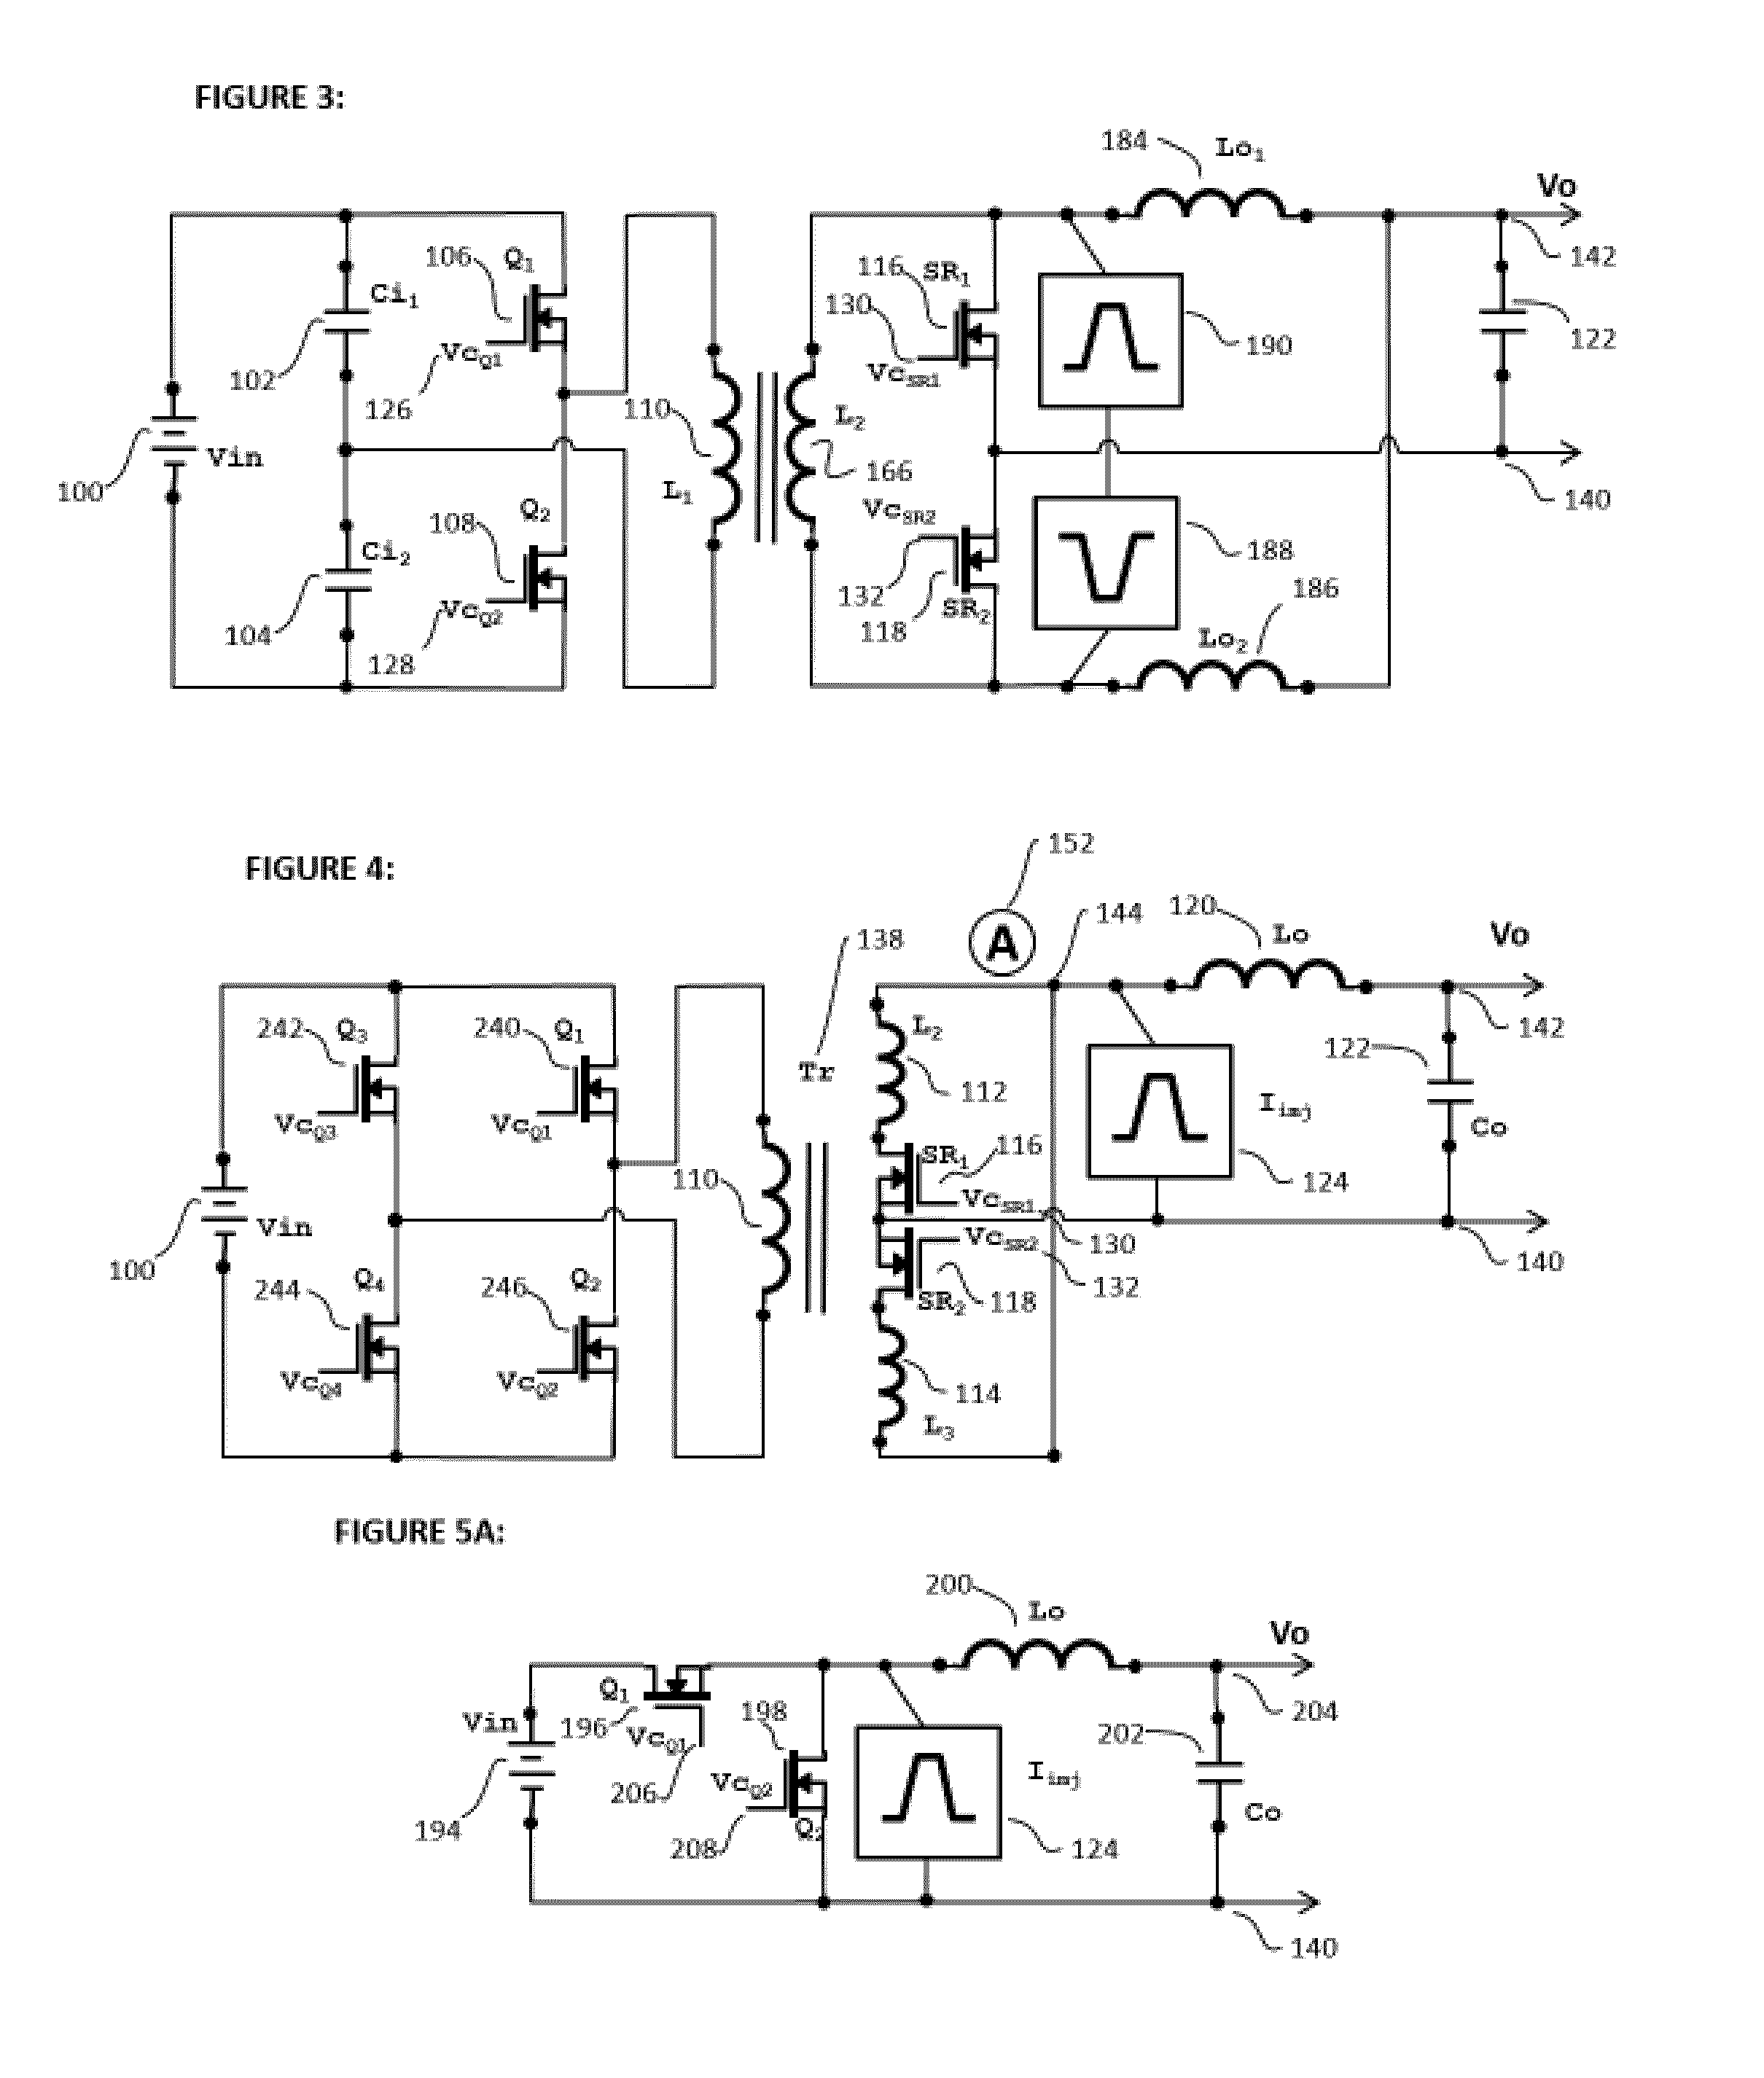 Soft Switching on all switching elements Converter through Current Shaping "Bucharest Converter"